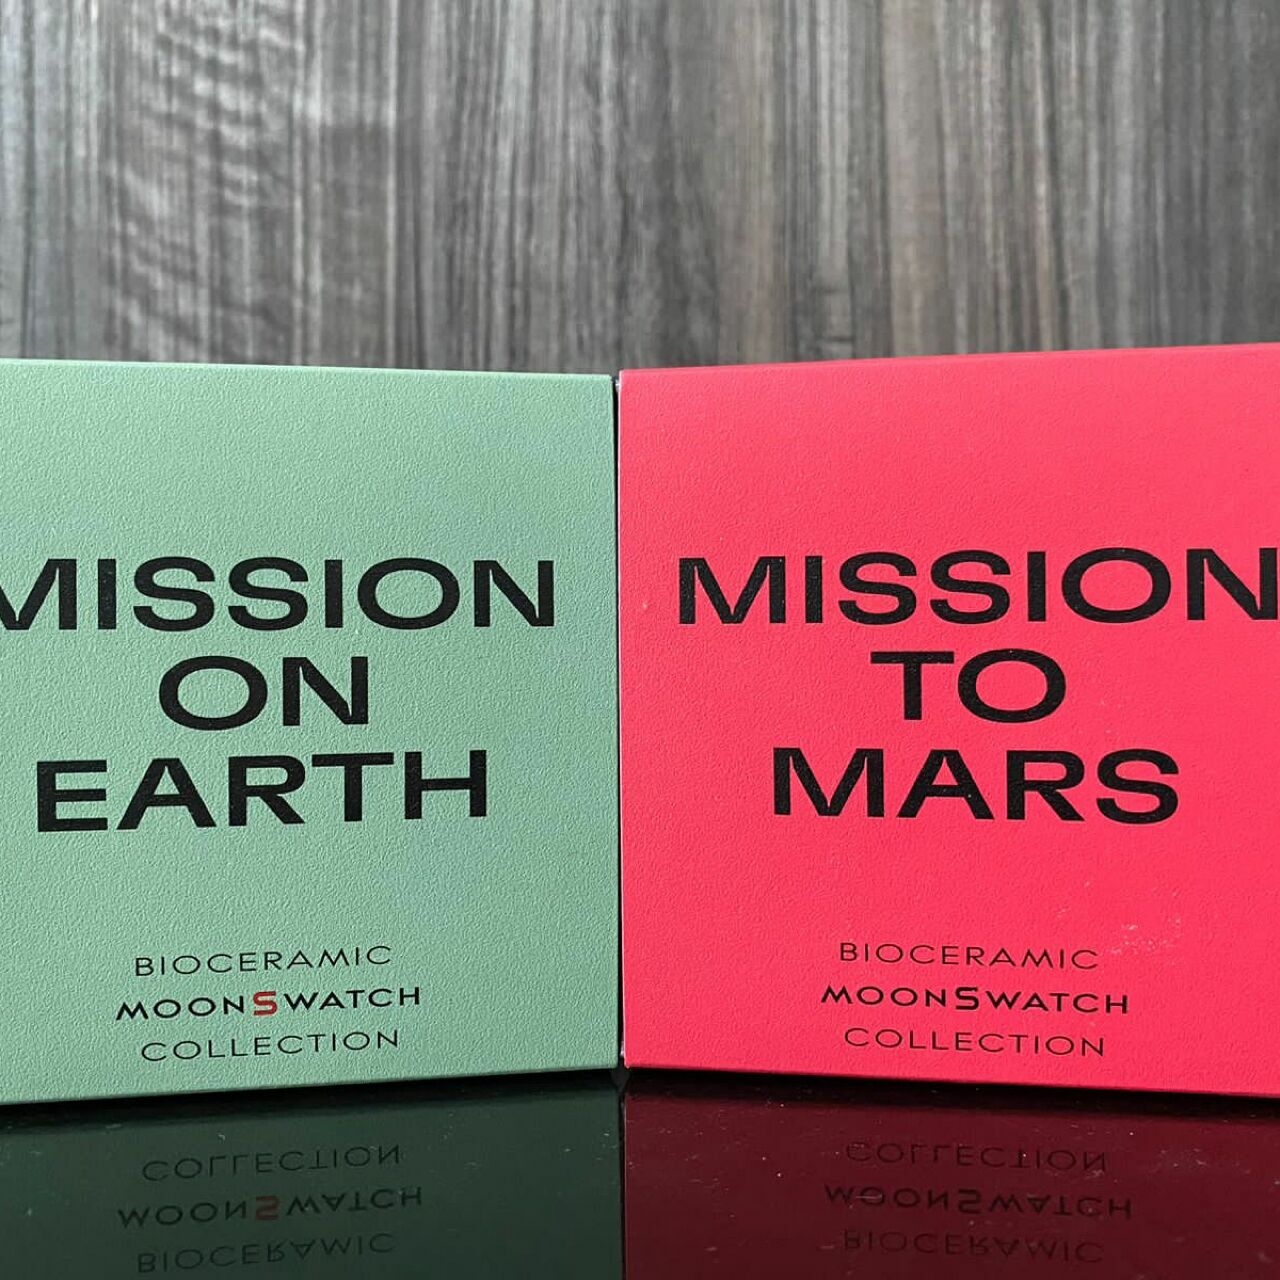 Moonswatch mission on earth